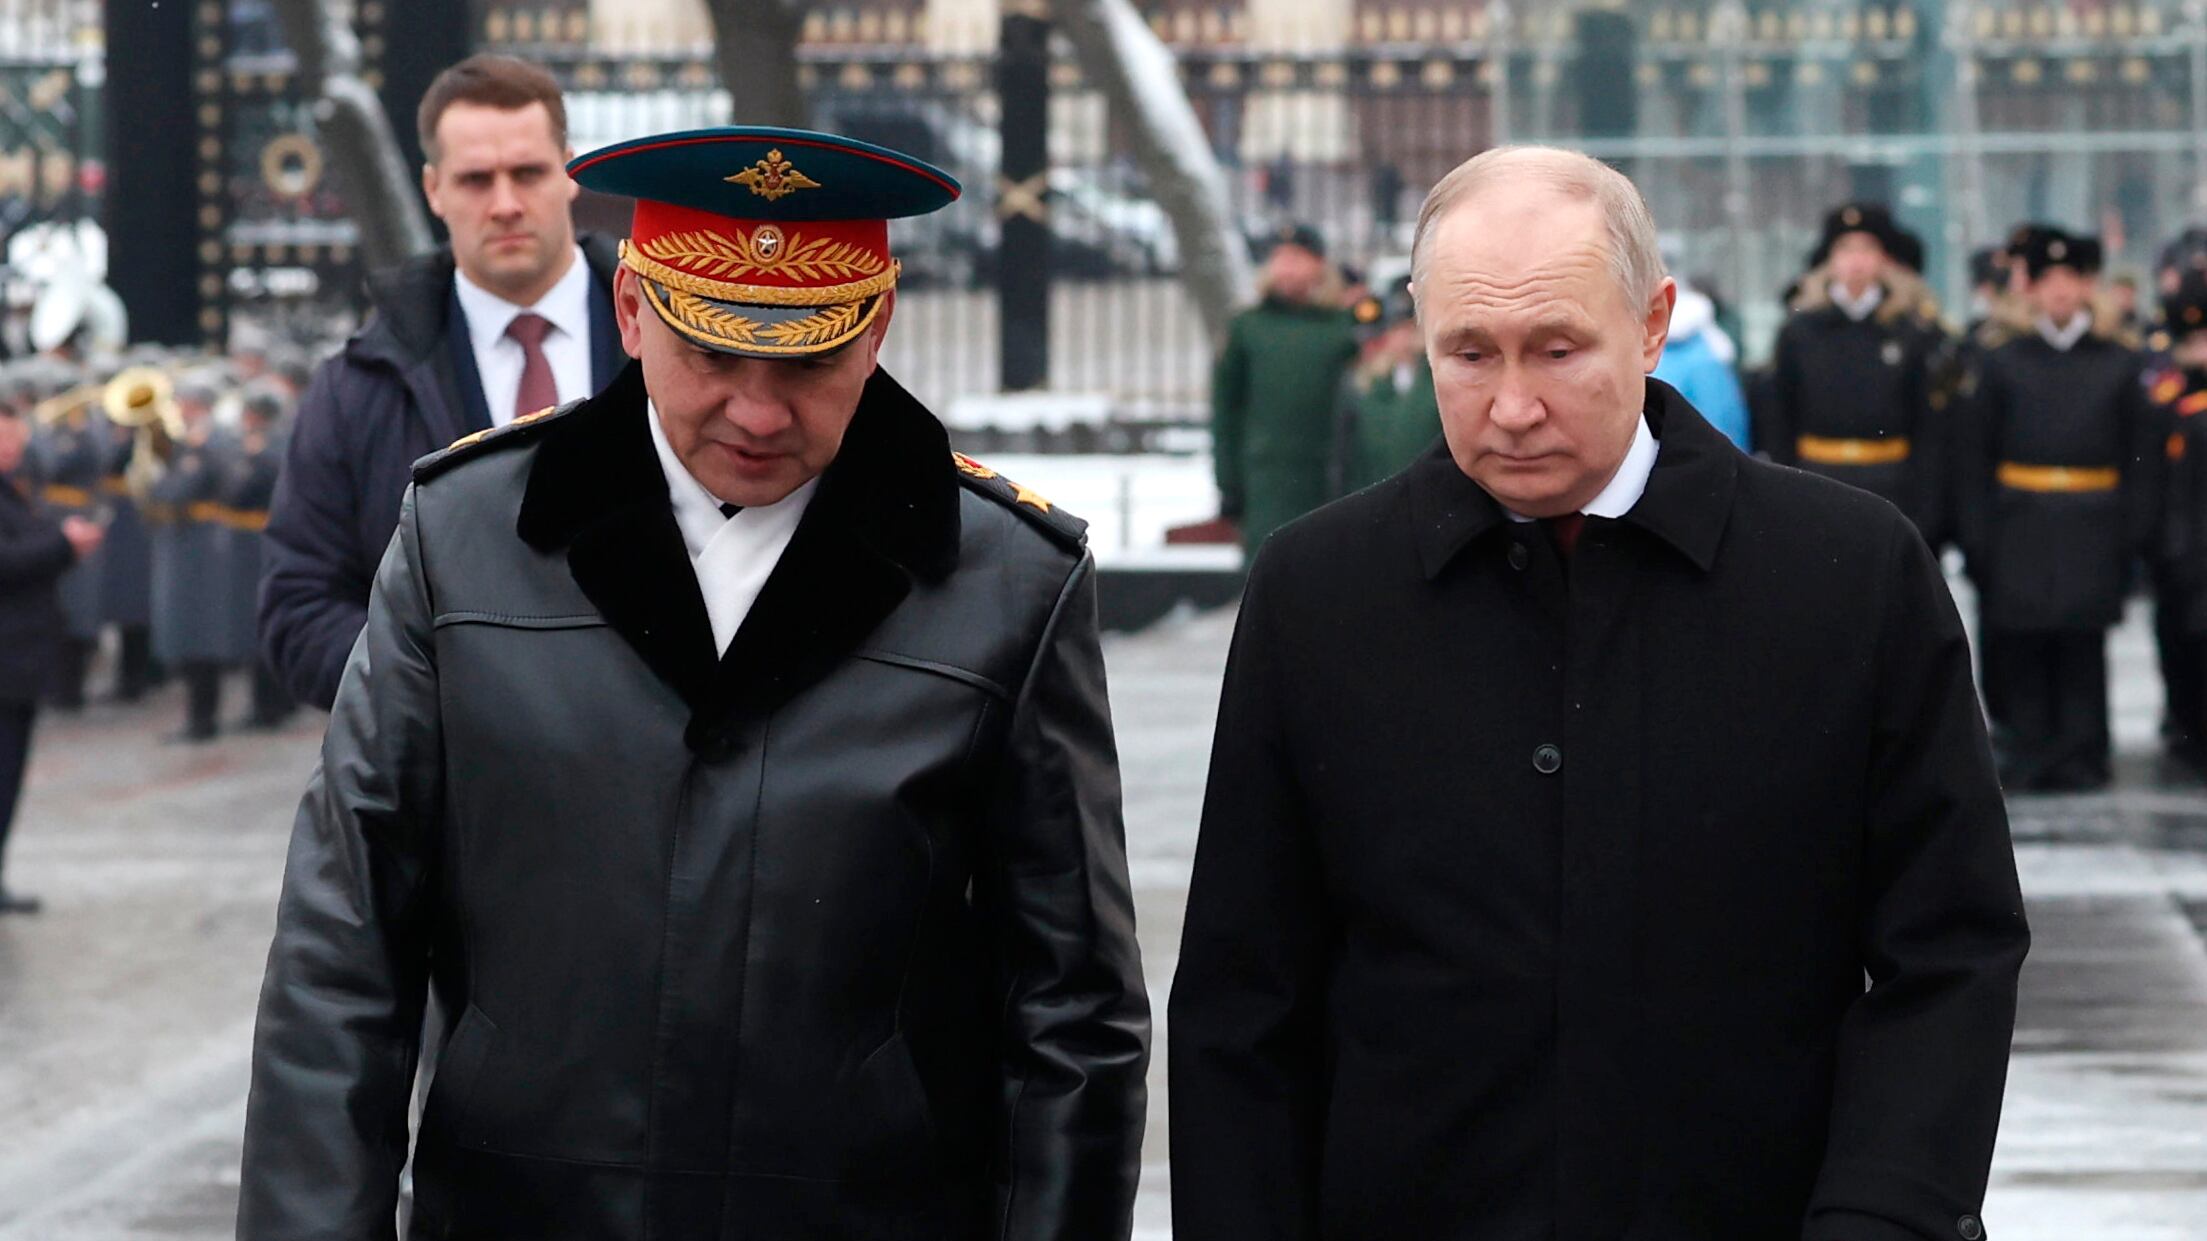 Russian President Vladimir Putin, right, and defence minister Sergei Shoigu take part in a wreath-laying ceremony at the Tomb of the Unknown Soldier in Alexander Garden on Defender of the Fatherland Day, in Moscow, Russia (Alexander Kazakov, Sputnik, Kremlin Pool Photo via AP)